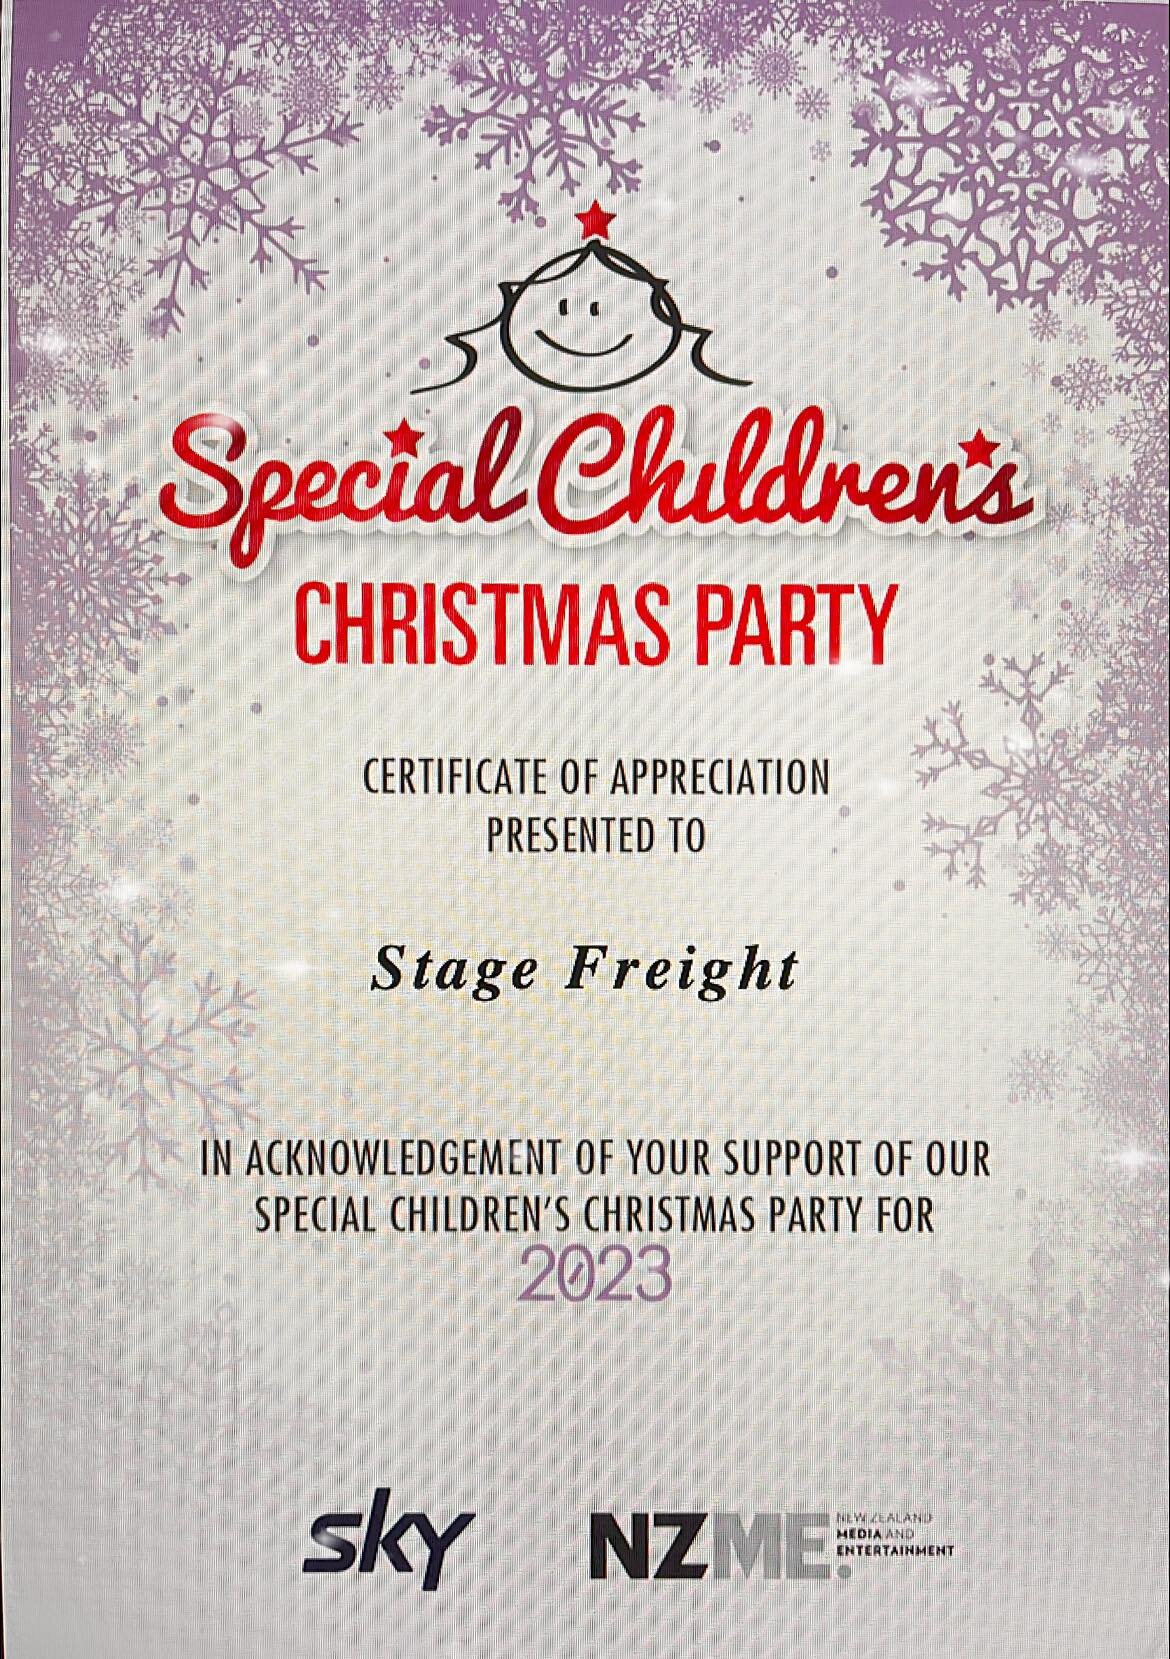 Special Children&rsquo;s Christmas Party, November 25th at the Te Rauparaha Arena, starts at 11am finishes at 2:30pm. 
Come on down and show your support for such a great event.